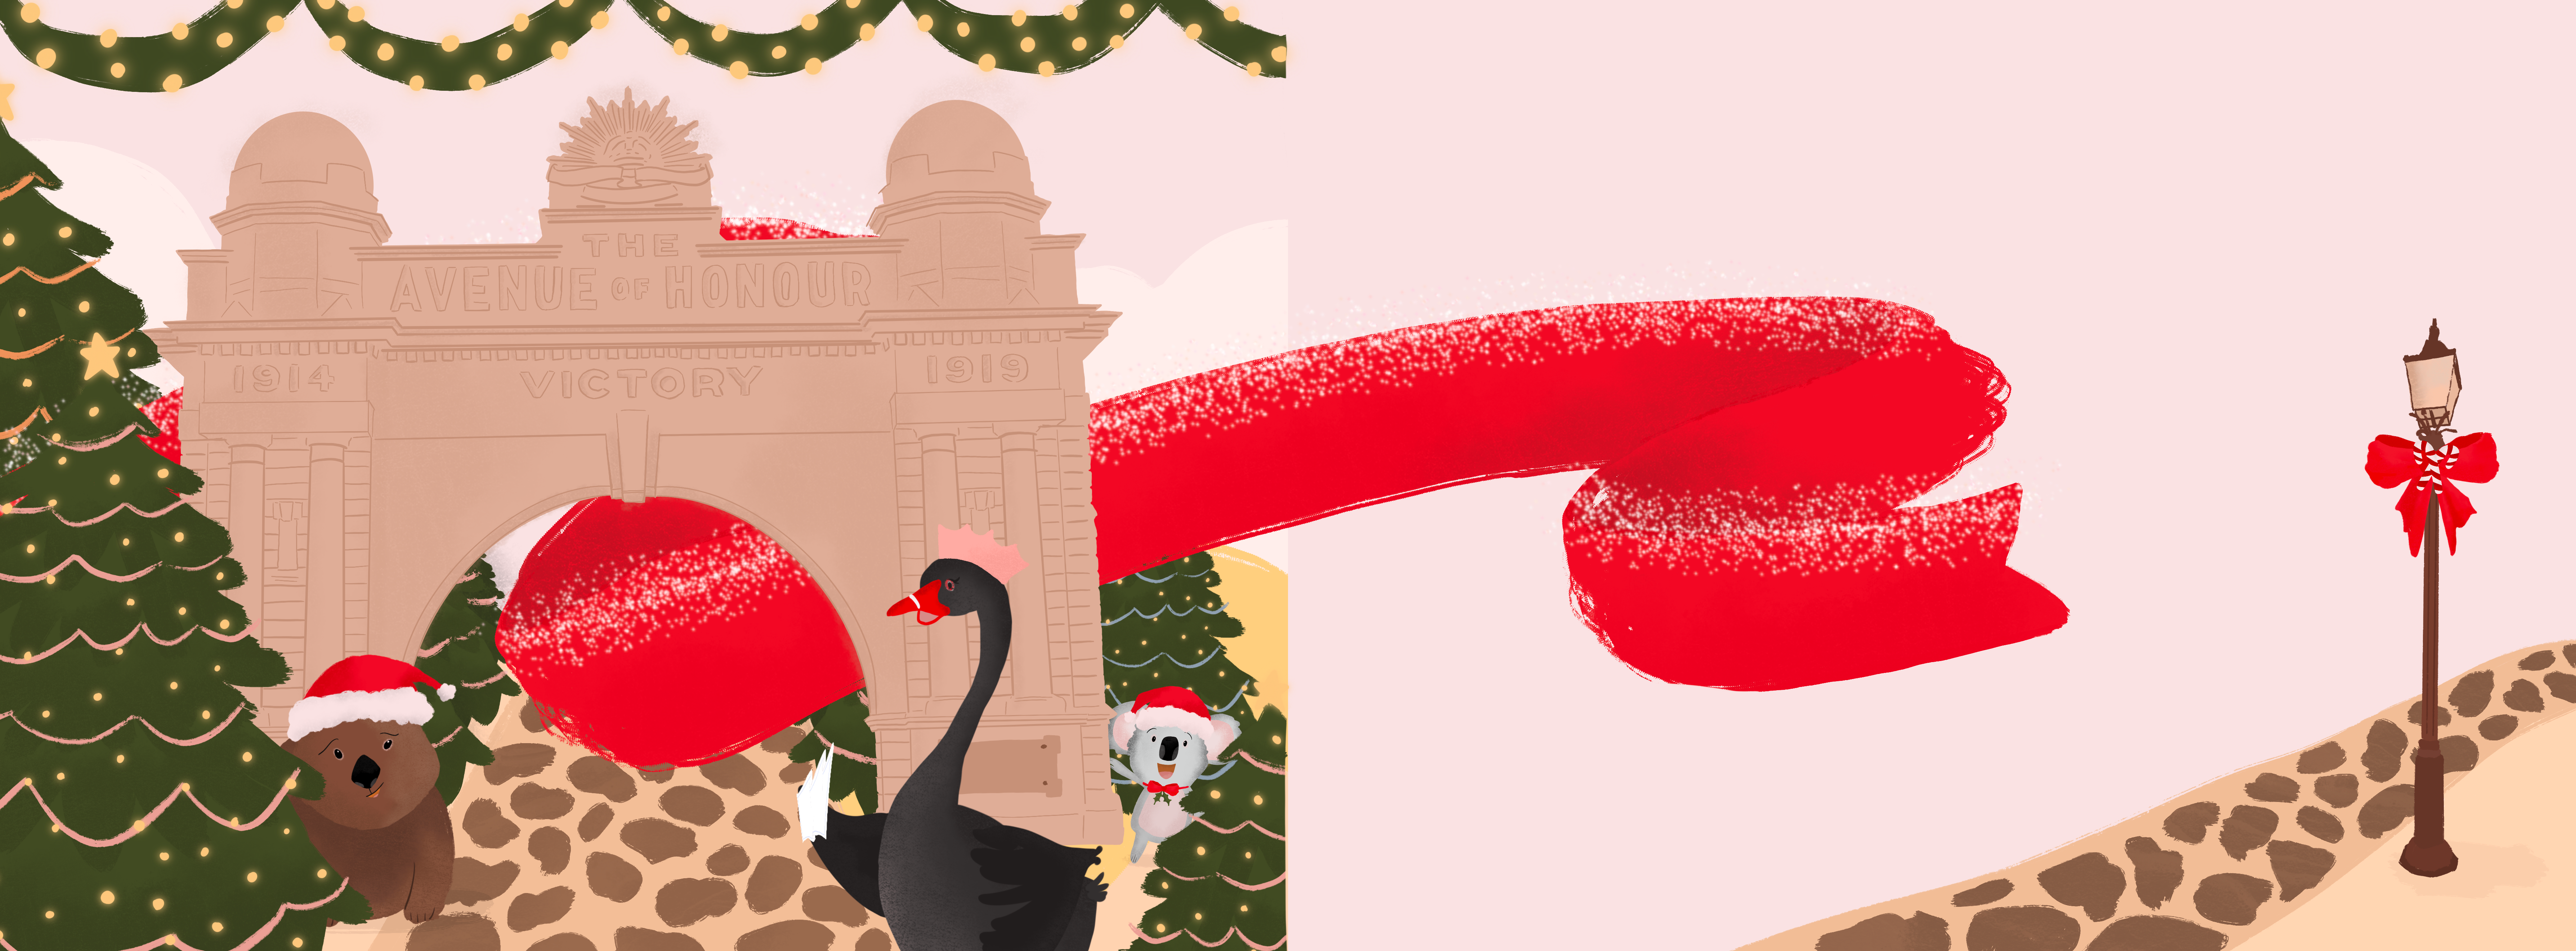 Image of an illustration from the 'Christmas in Ballarat' children's book by Liv Lorkin, depicting a split book spread. One side shows Miss Eccles, Lynnie, and Herbert looking around the Arch of Victory with Christmas trees surrounding them, while a red ribbon is in the background. On the opposite side, there is a lamp post with a red ribbon tied to it.